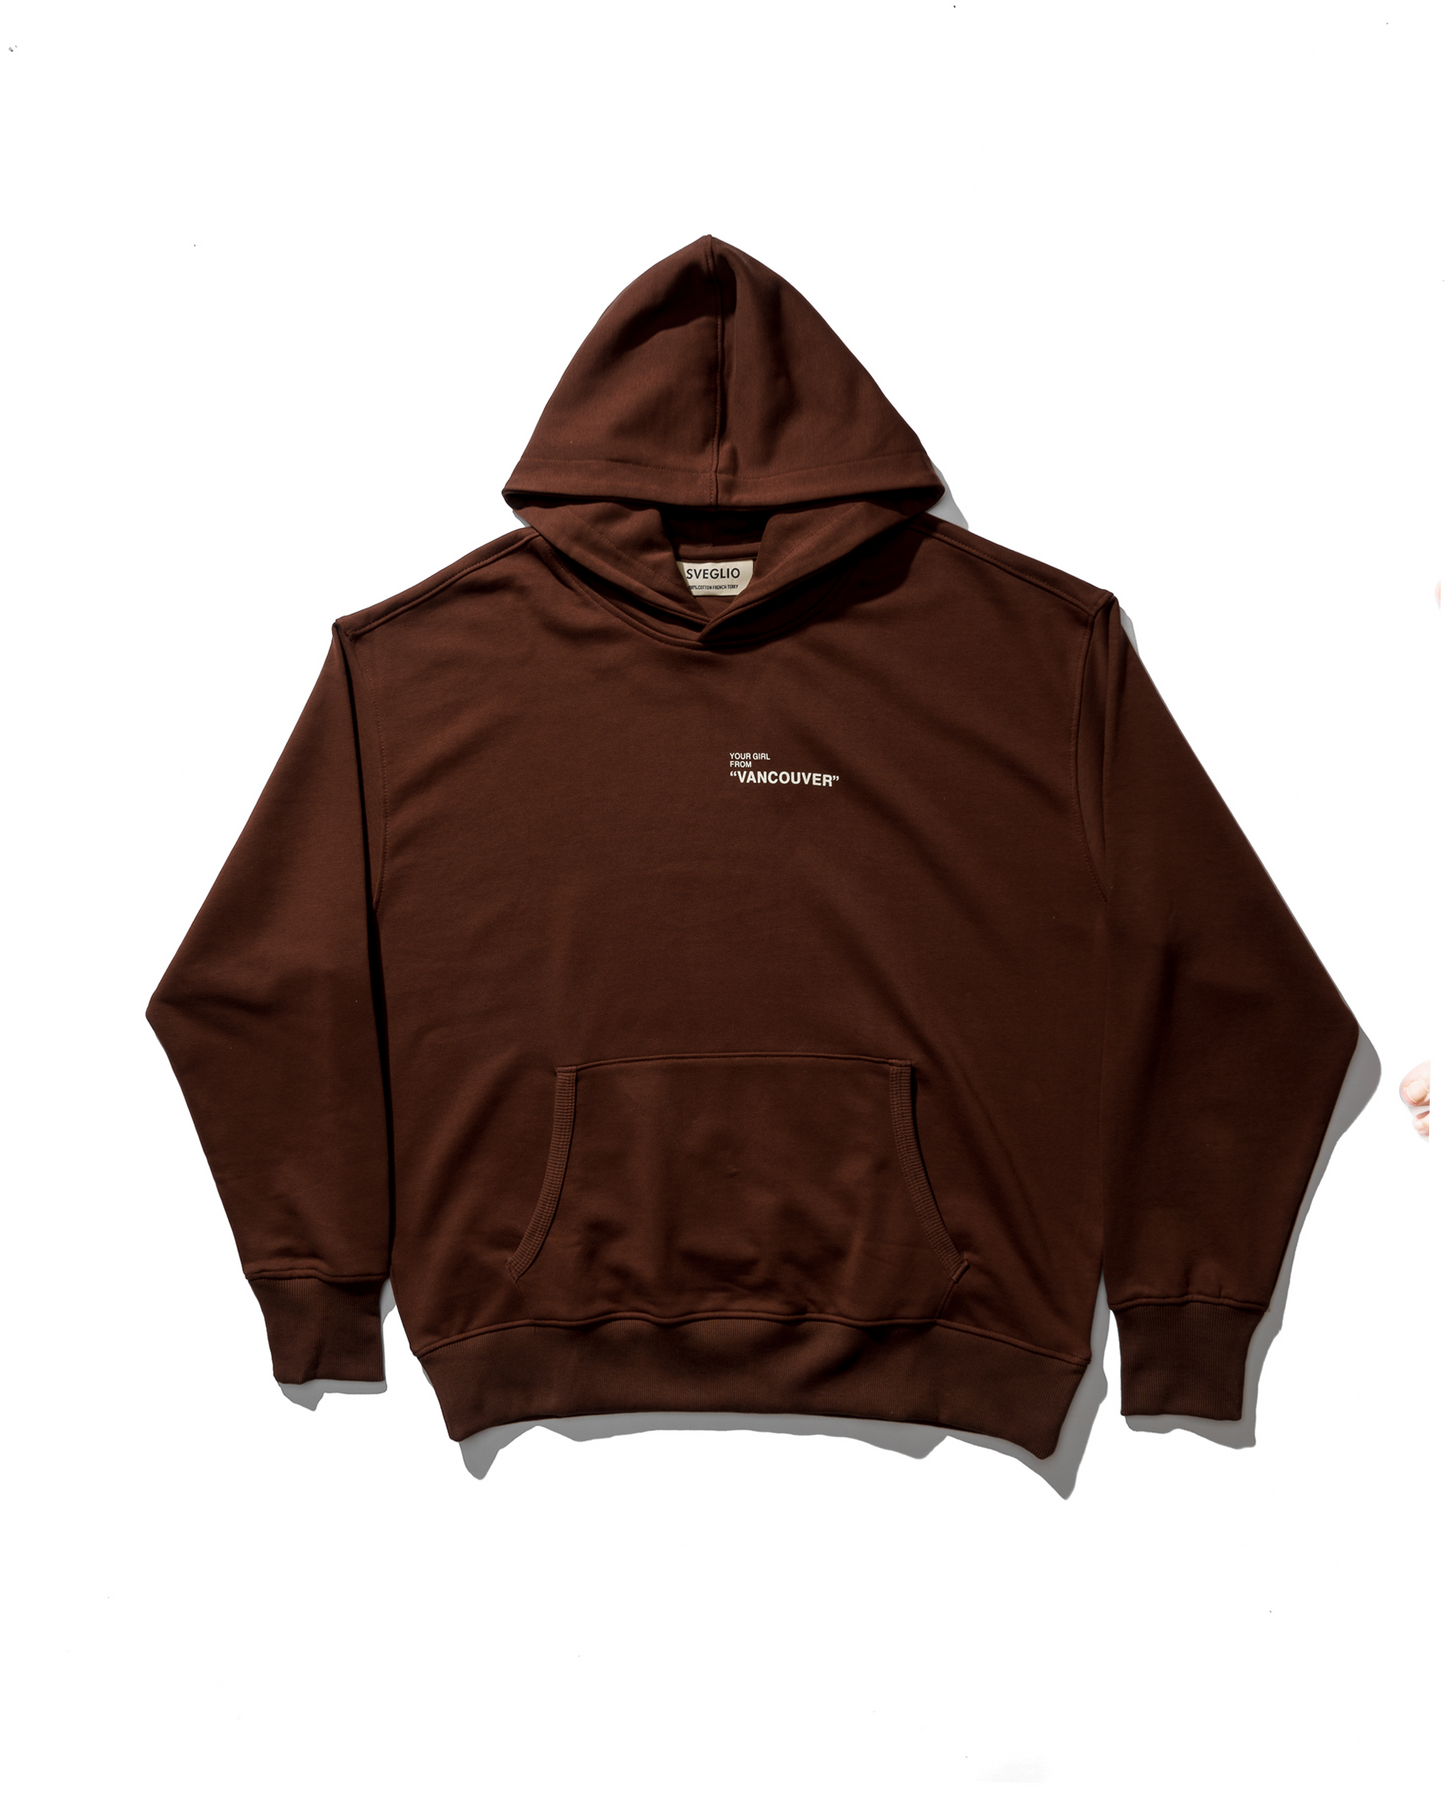 Your Girl from Vancouver Hoodie - Brown